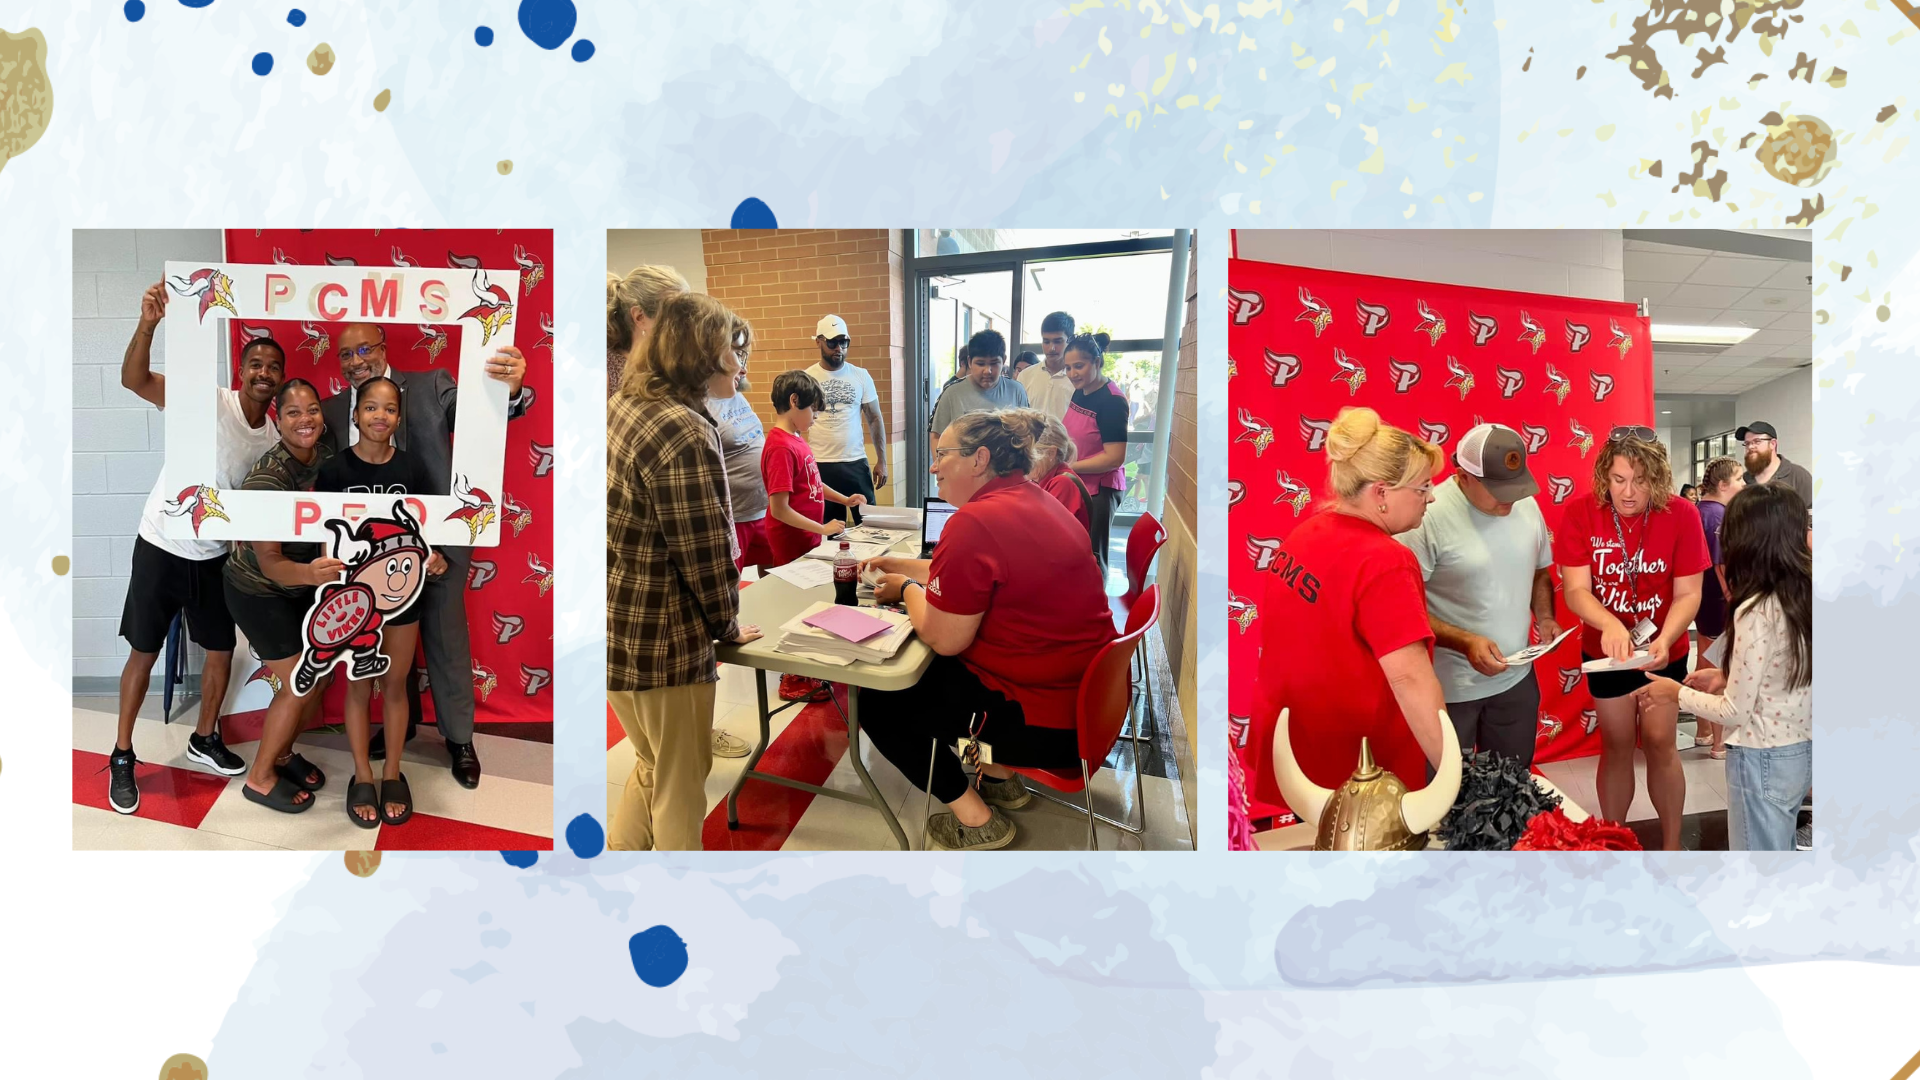 3 photos from the PCMS Schedule pick up, students, families and staff